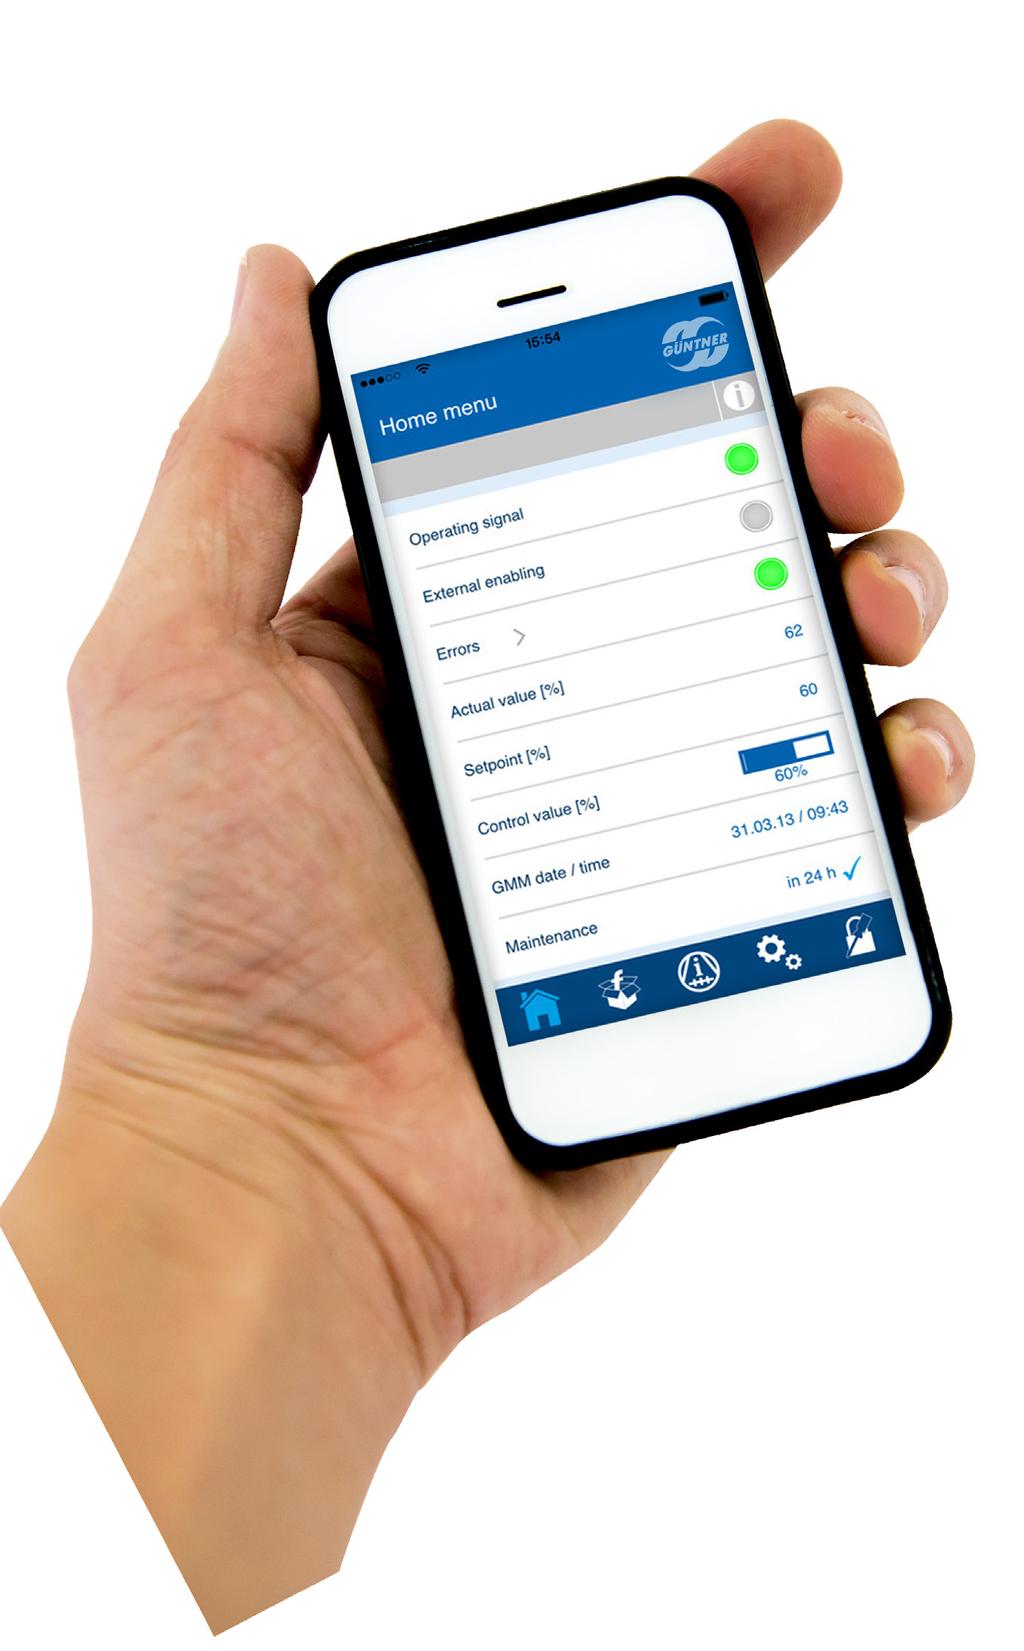 Next step communication The Güntner Controls App allows you to configure your GMM (Güntner Motor Management) easily and comfortably with your smartphone.